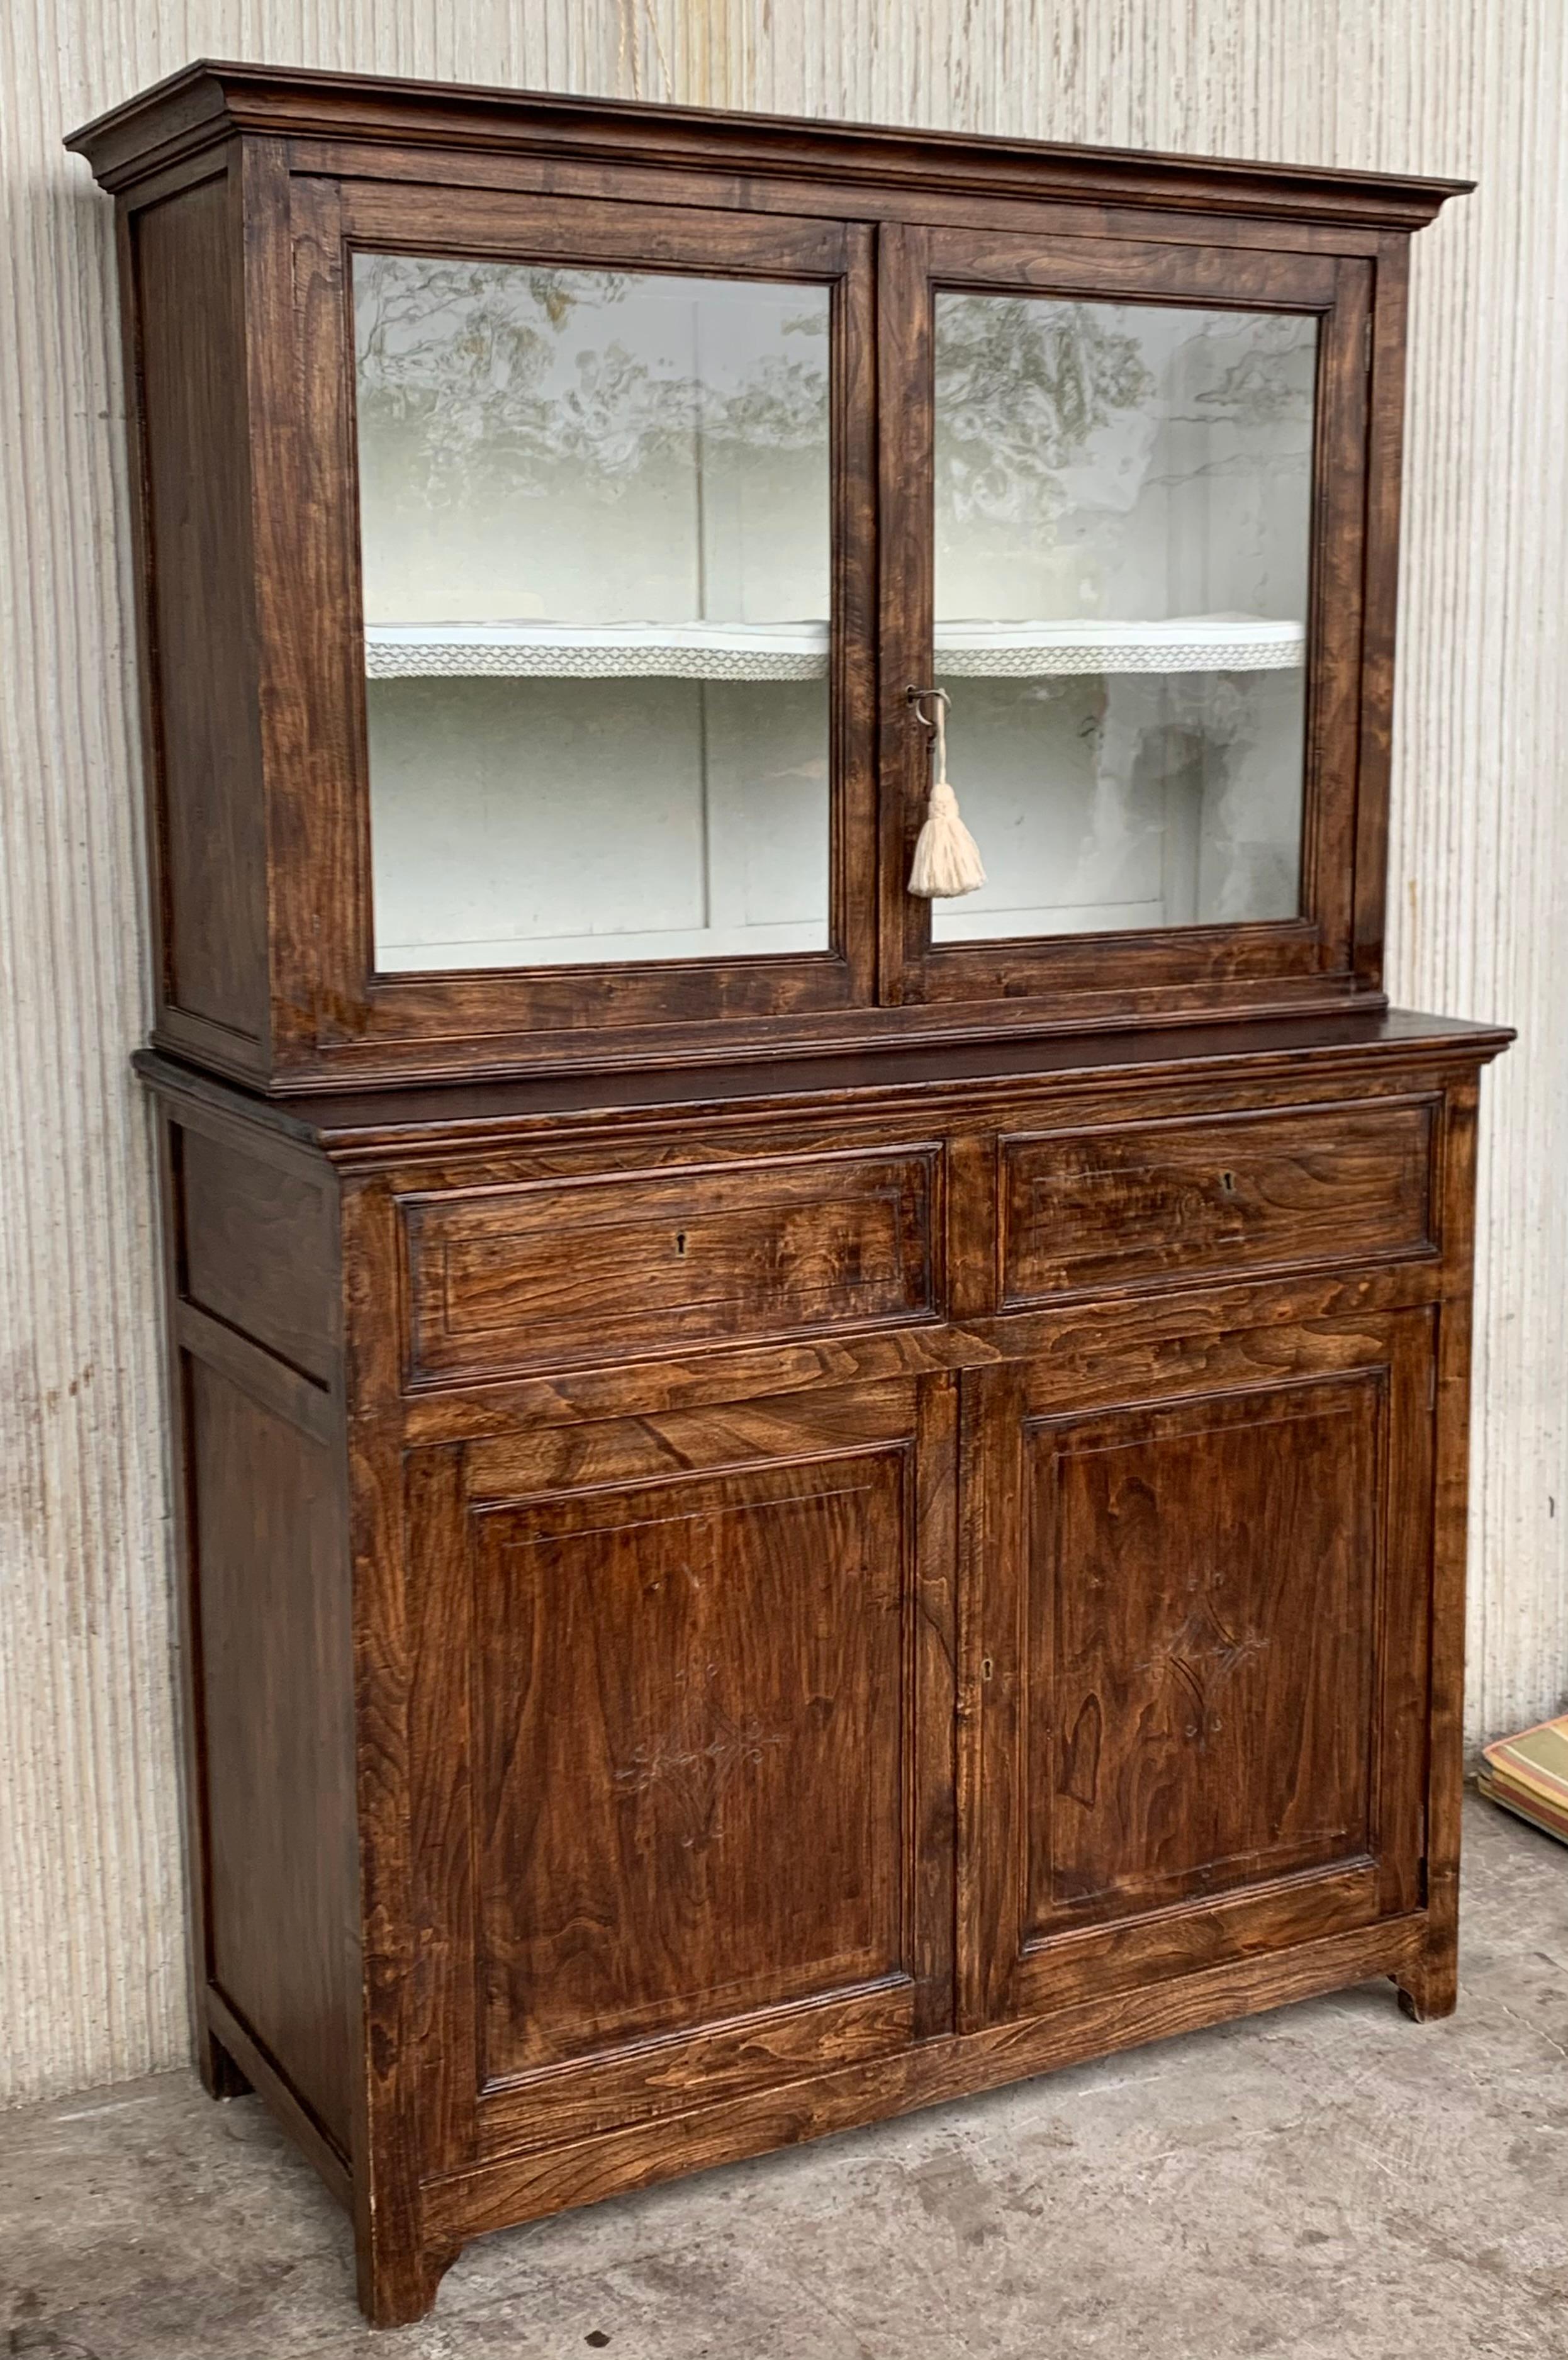 Beautiful married step back walnut pie safe cupboard with glazed doors, probably from France, mid 19th century. The upper section with cornice molding and two glazed doors surmounting a lower case with two drawers over two doors and ends with